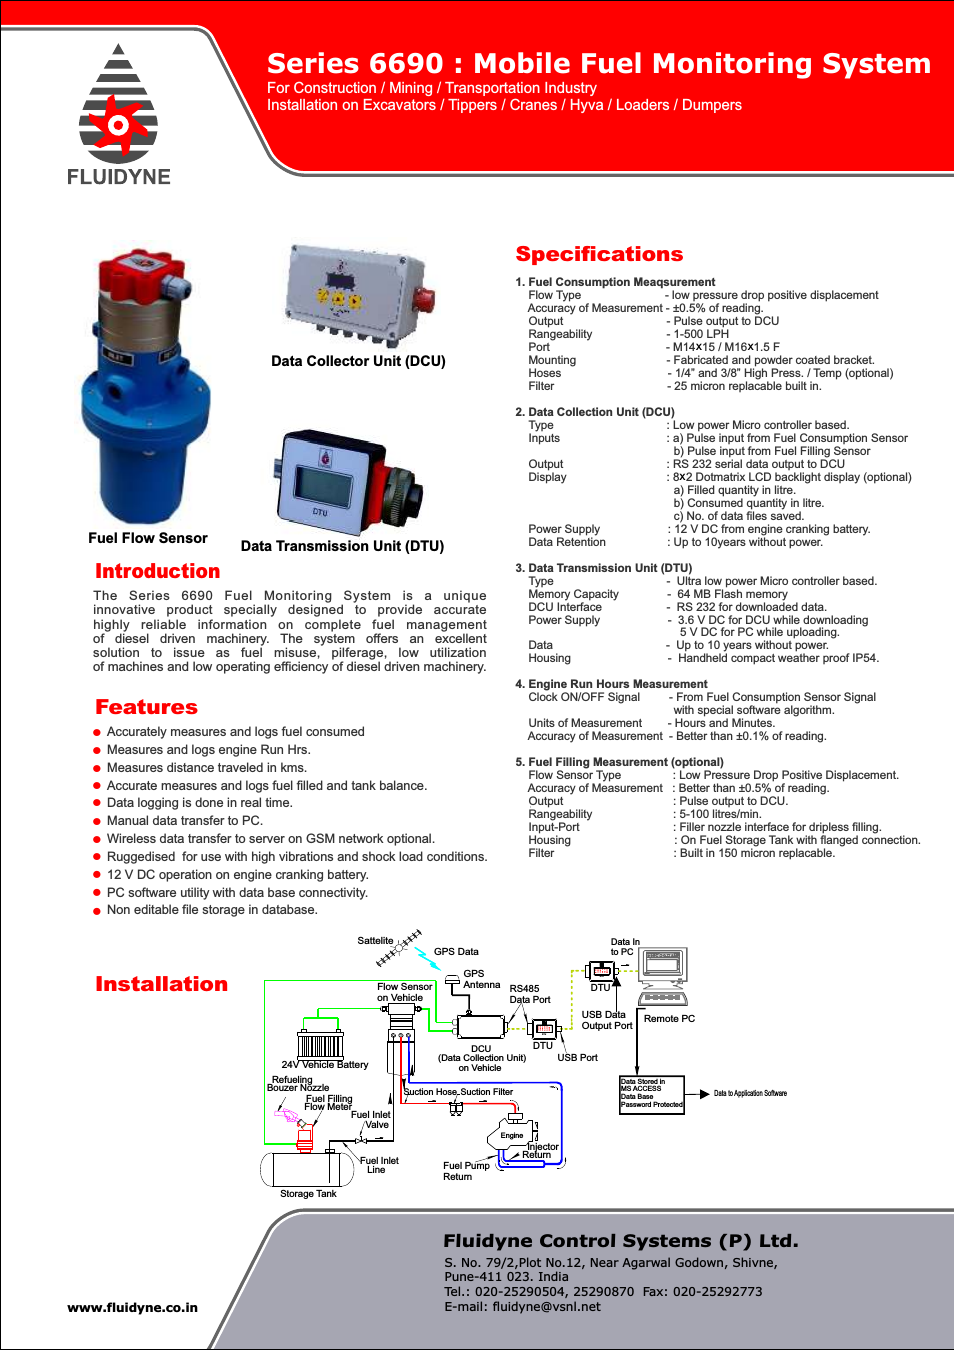 6690 Series Mobile Fuel Monitoring System